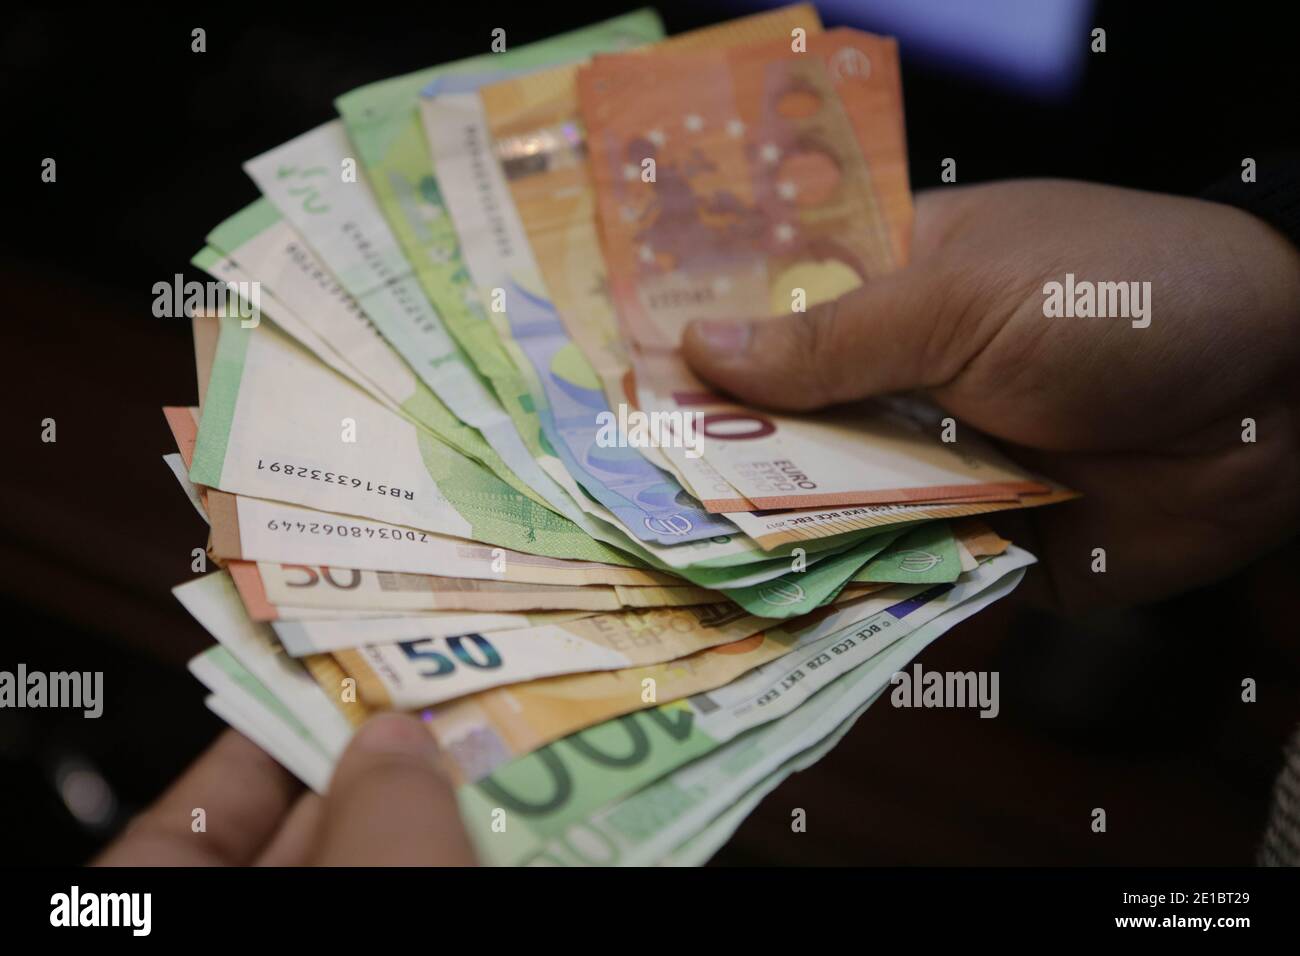 Gaziantep, Southeast Anatolia, Turkey. 22nd Dec, 2020. Gaziantep, Turkey. A  money changer employee shows Euro banknotes in different denominations at a  Bureau de Change store in Gaziantep, Turkey. The Euro banknotes are